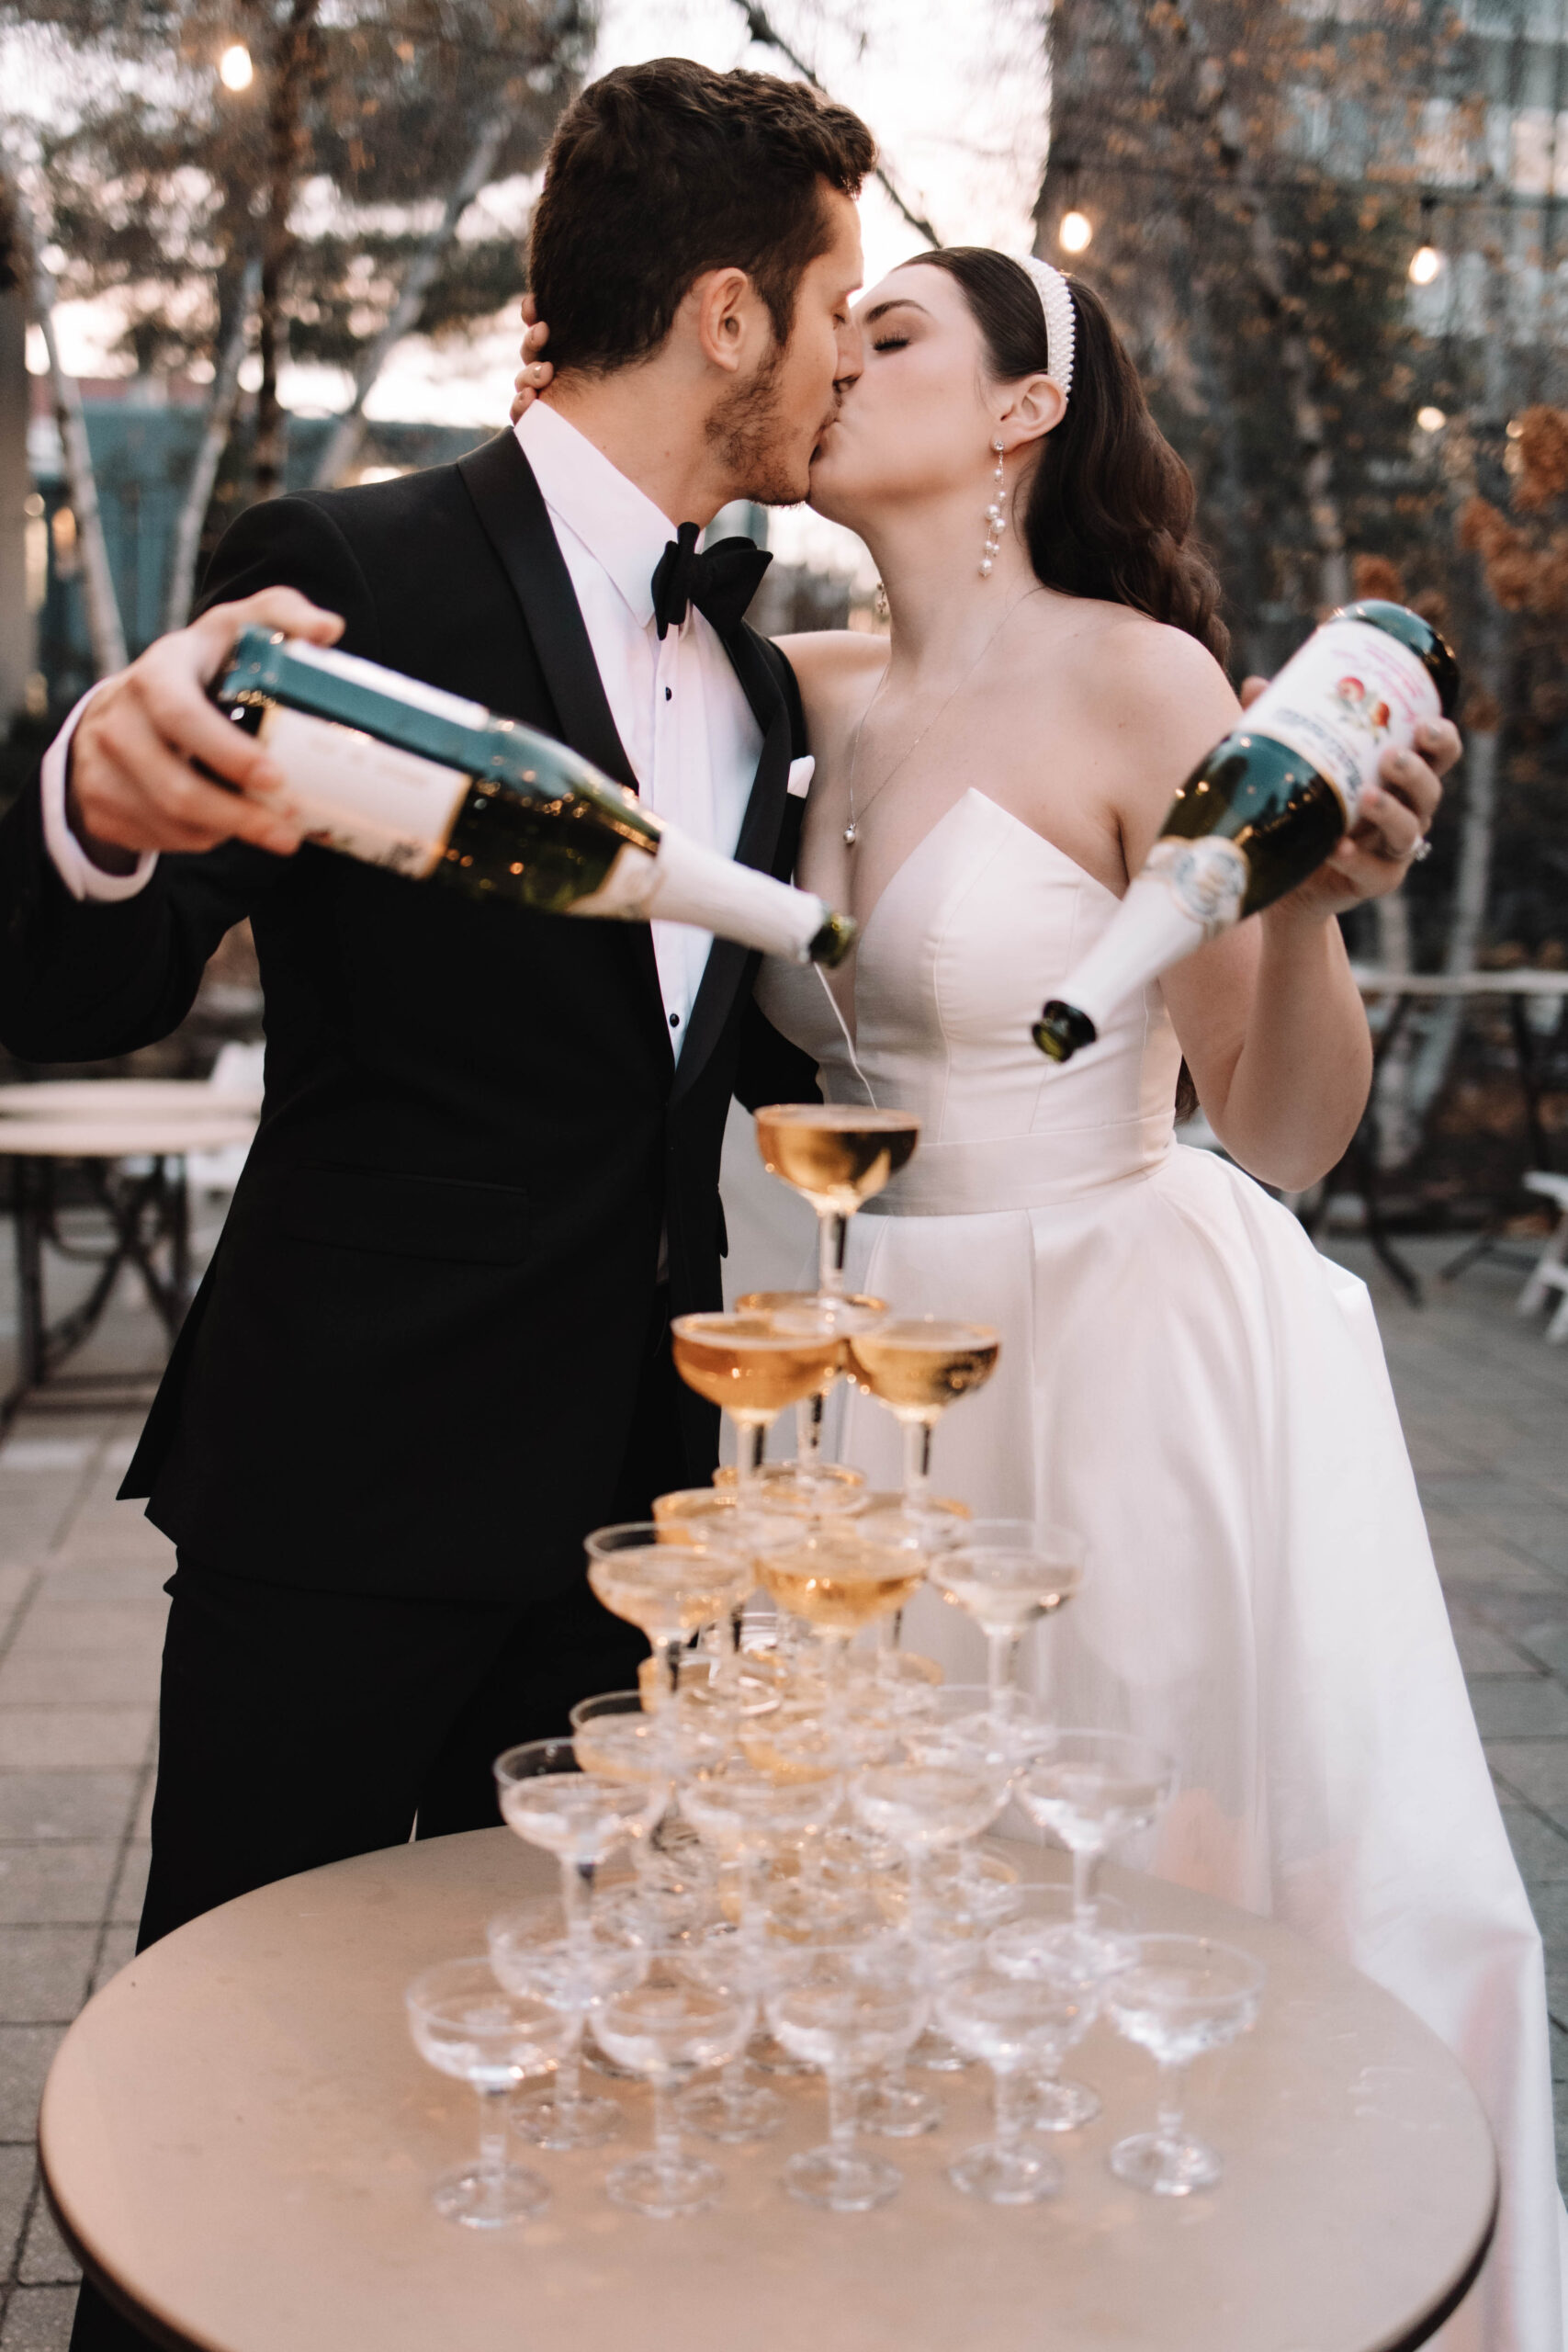 A bride and groom in formal attire kissing while pouring champagne into a tower of glasses outdoors.